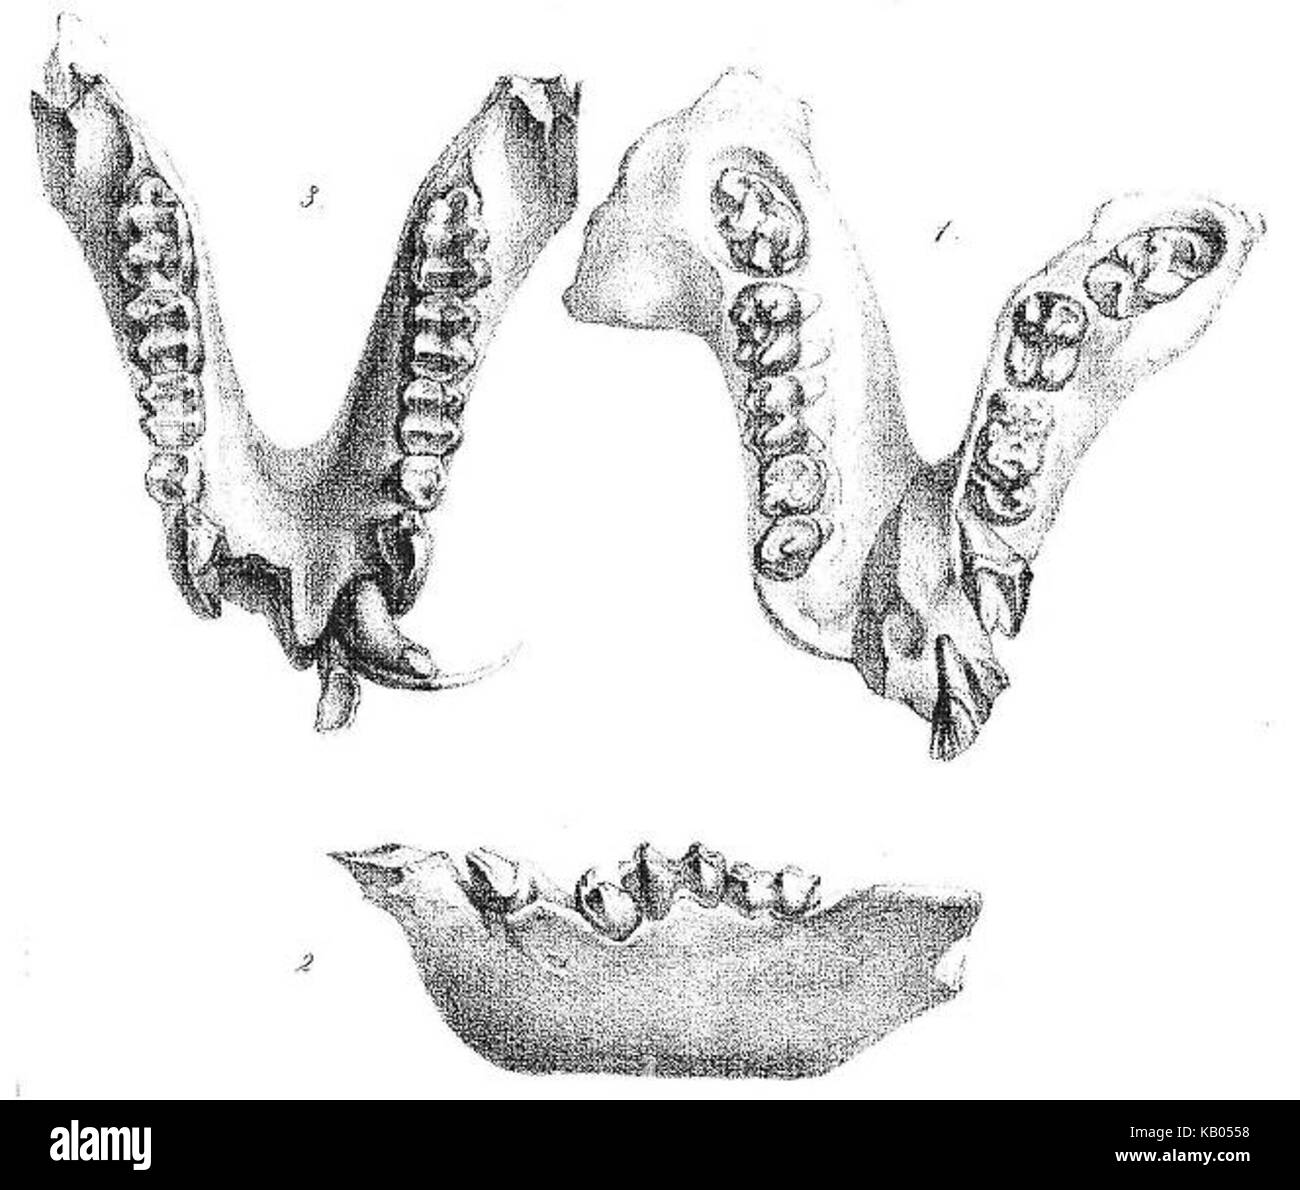 The type specimens of Oreopithecus bambolii Gervais 1872 from Montebamboli  Stock Photo - Alamy